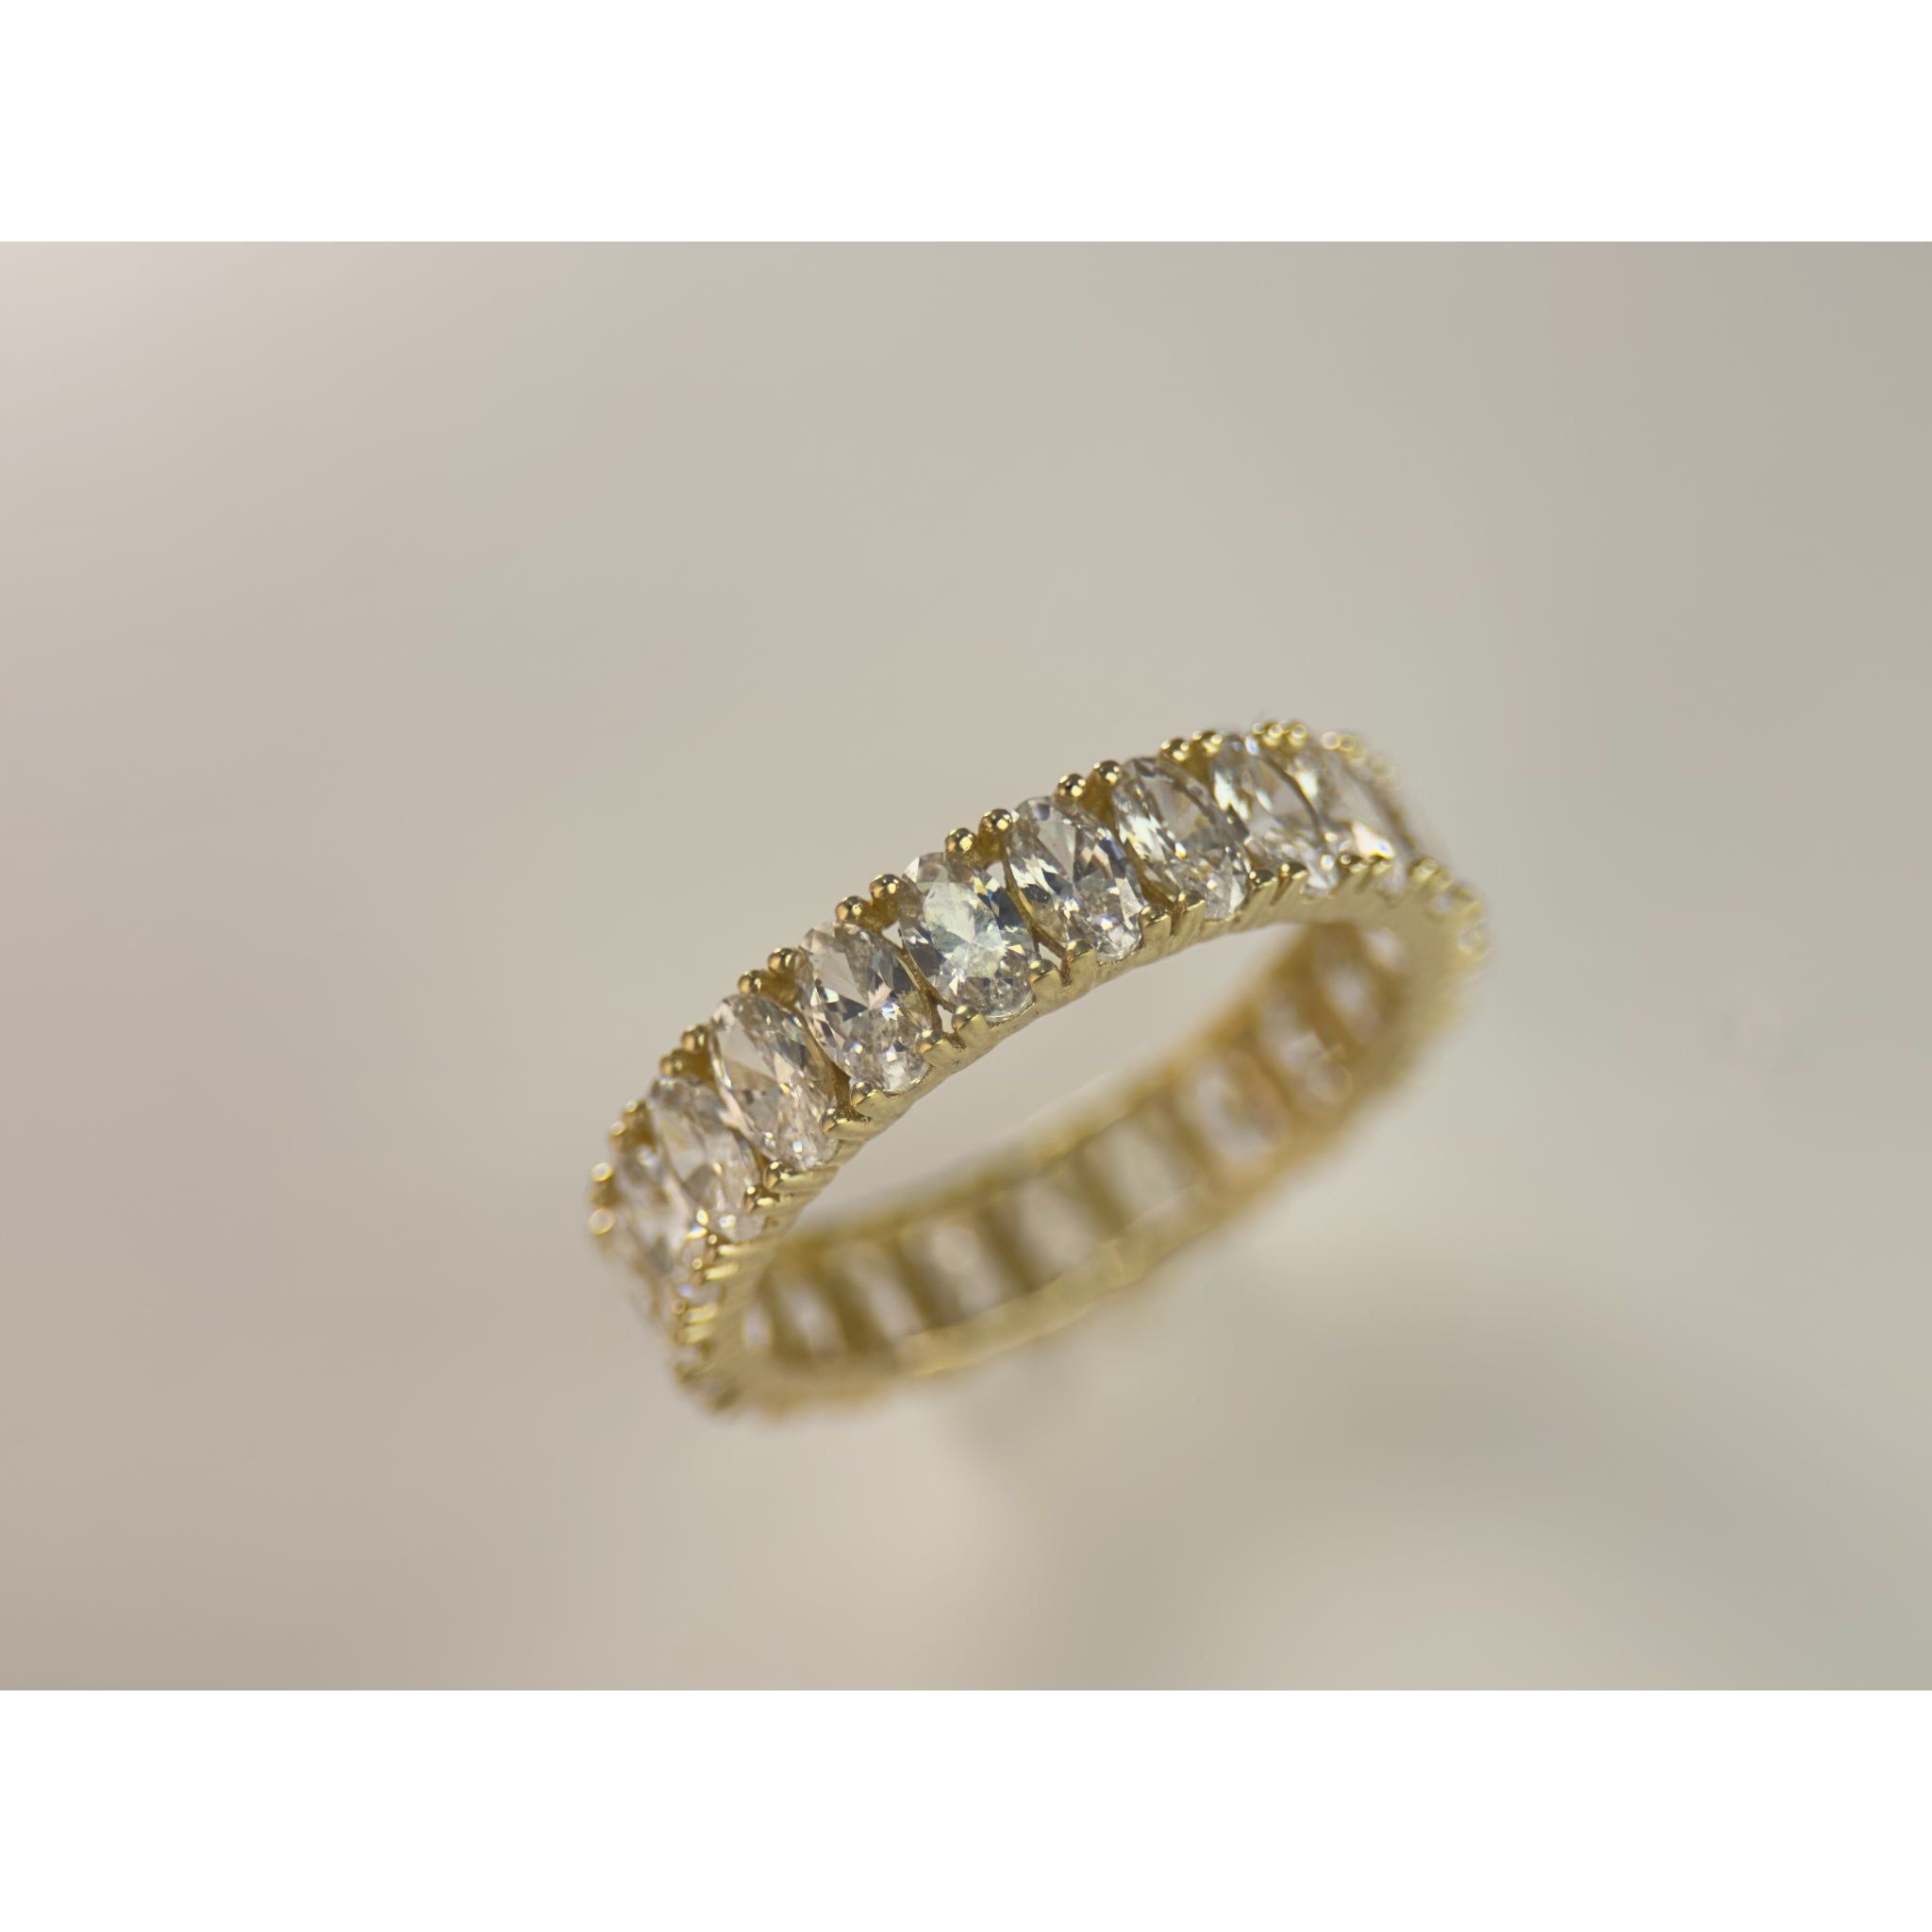 DR2008 - 14K Yellow Gold - Lab Created Stones - Ladies Gold Rings - 2 Row - Eternity Band